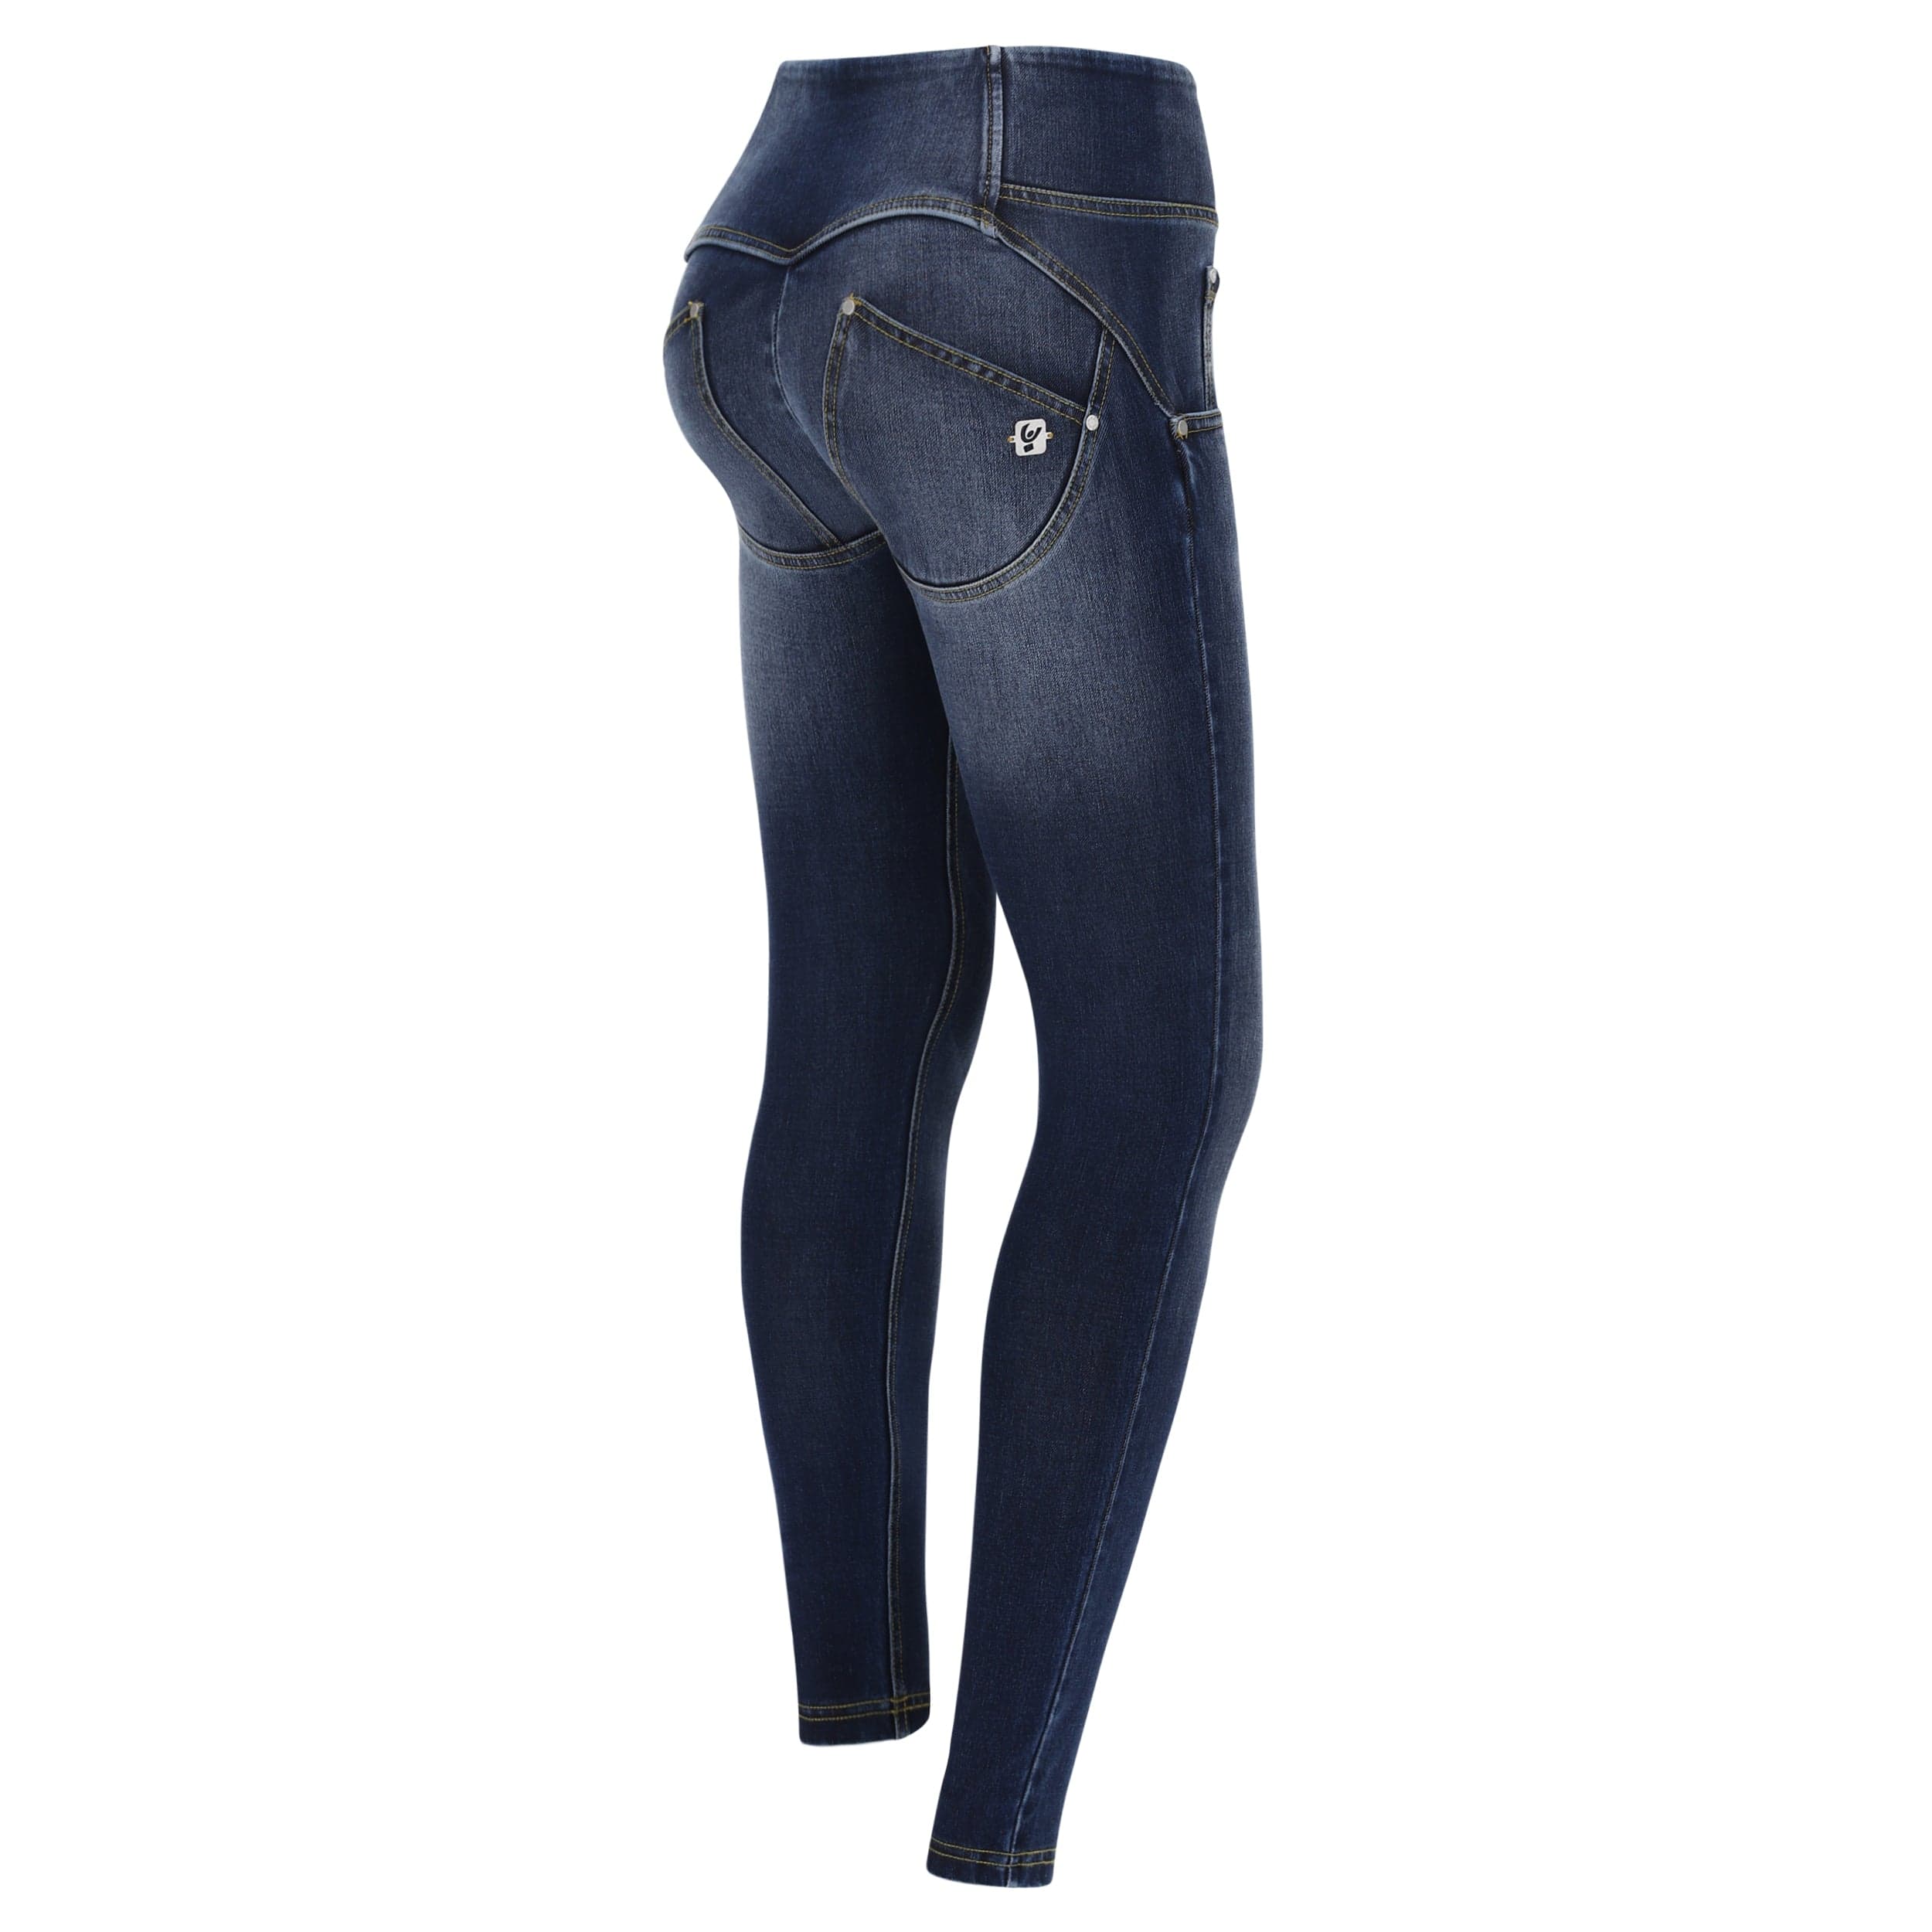 WR.UP® SNUG Jeans - 3 Button Mid Waisted - Full Length - Dark Blue + Yellow Sitching 2